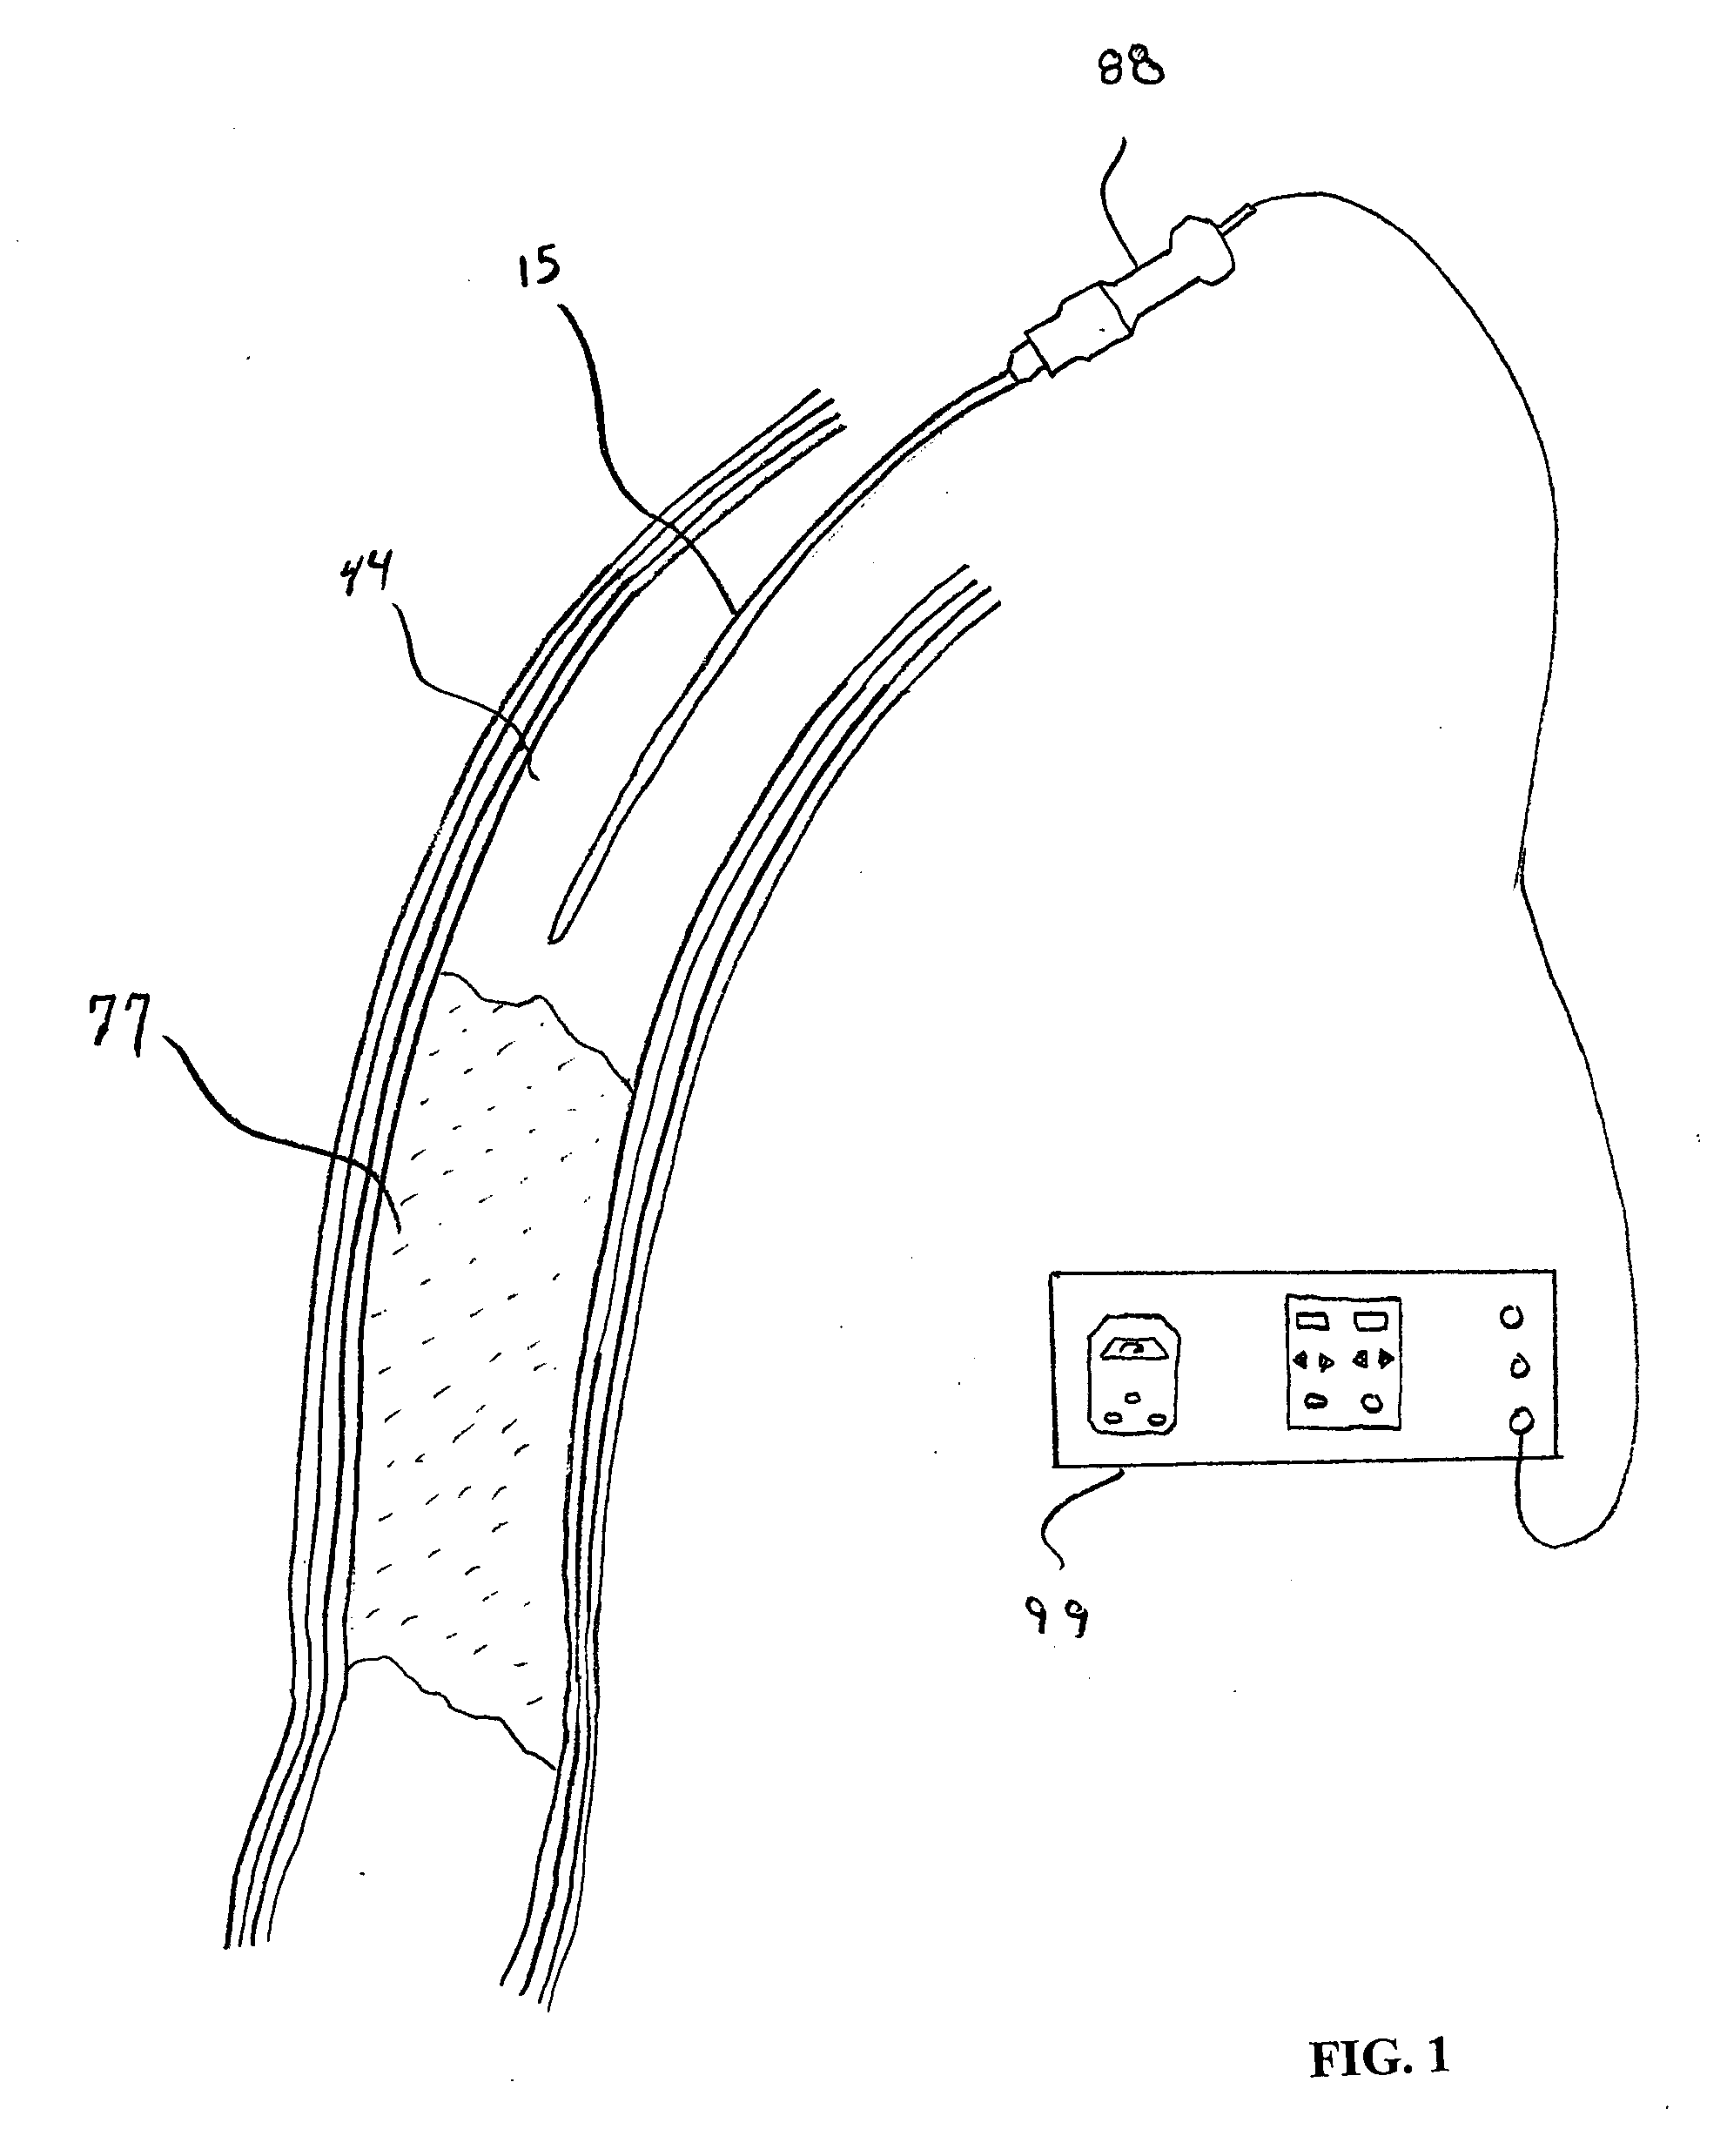 Apparatus and method for an ultrasonic medical device to treat chronic total occlusions